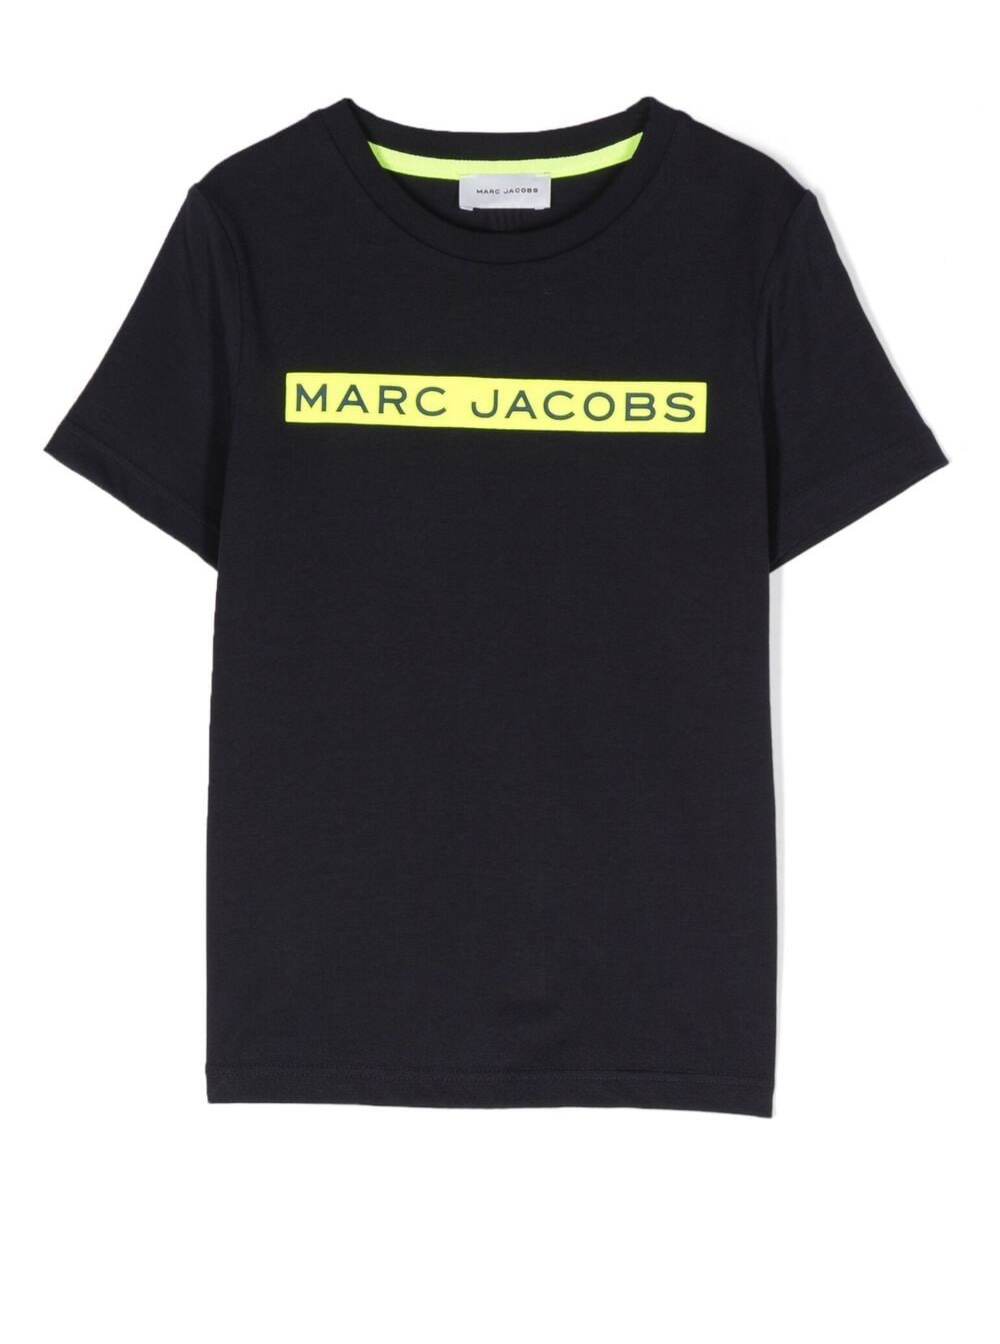 MARC JACOBS BLACK CREWNECK T-SHIRT WITH PRINTED LOGO TO THE FRONT IN COTTON BOY